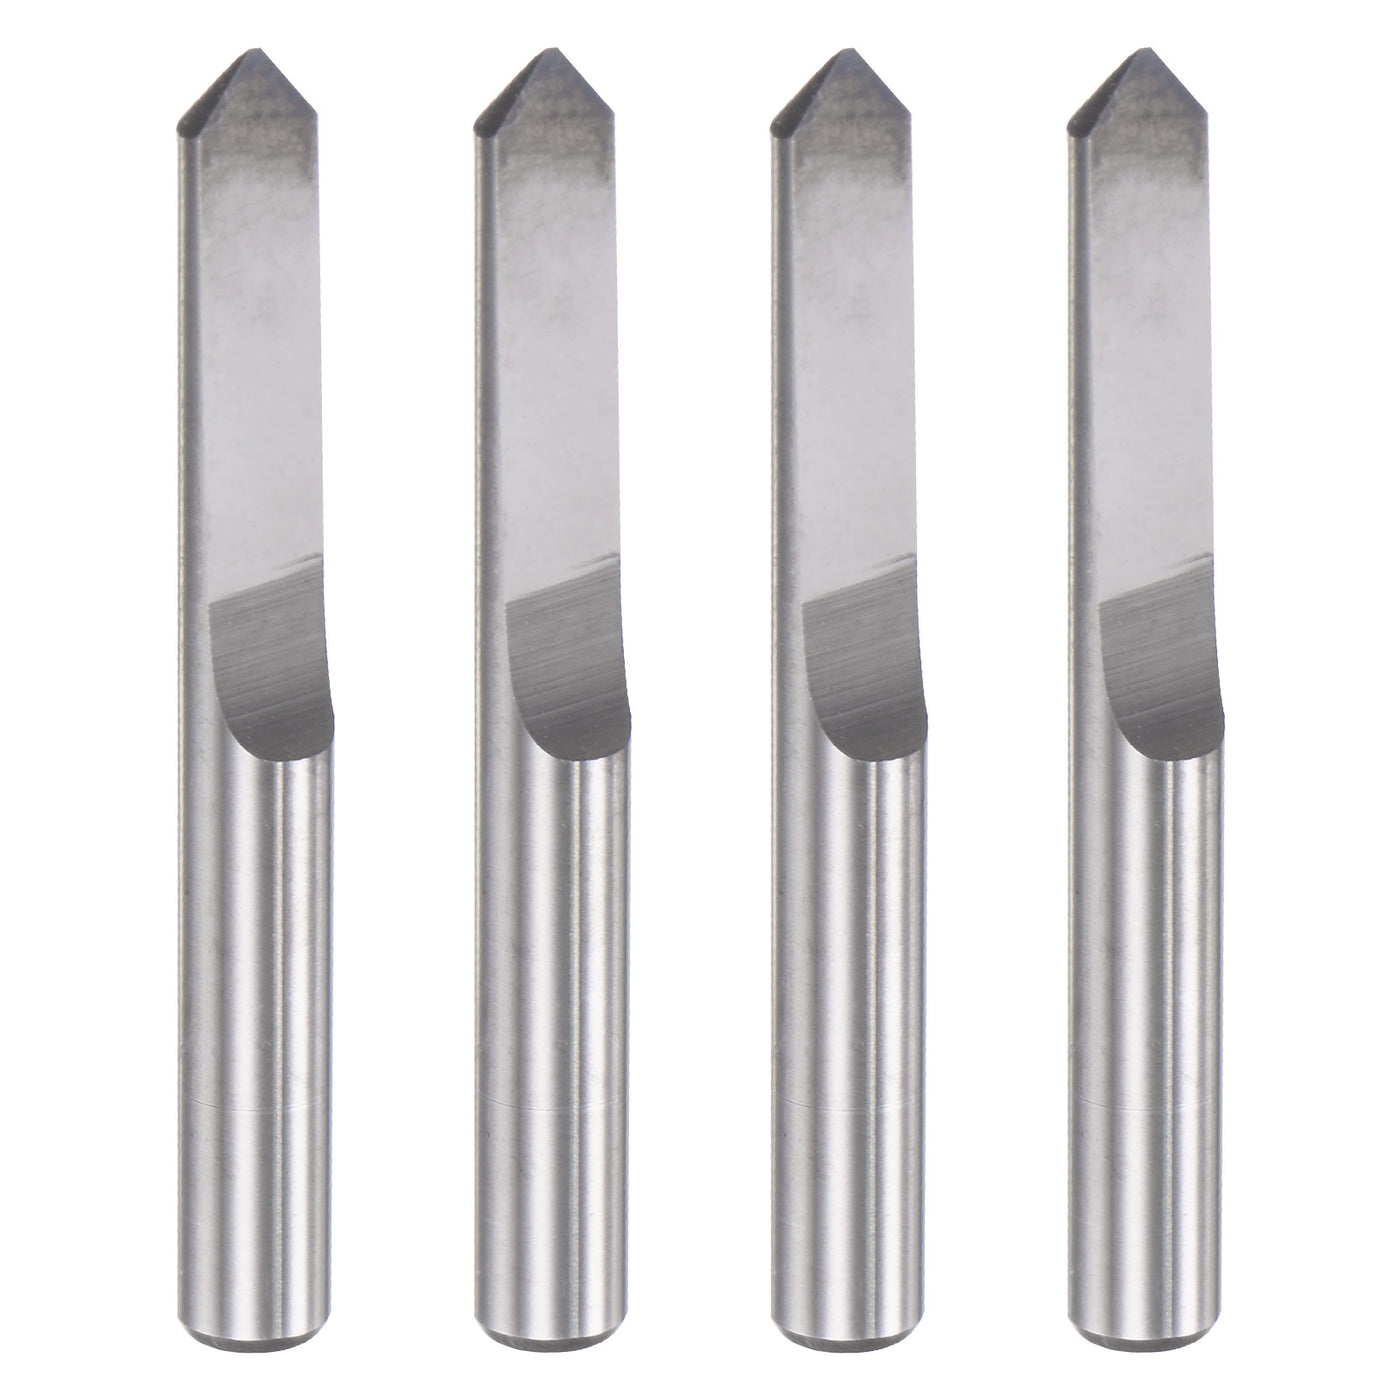 uxcell Uxcell 1/8" Shank 0.3mm Tip 90 Degree Solid Carbide Wood Engraving CNC Router Bit 4pcs